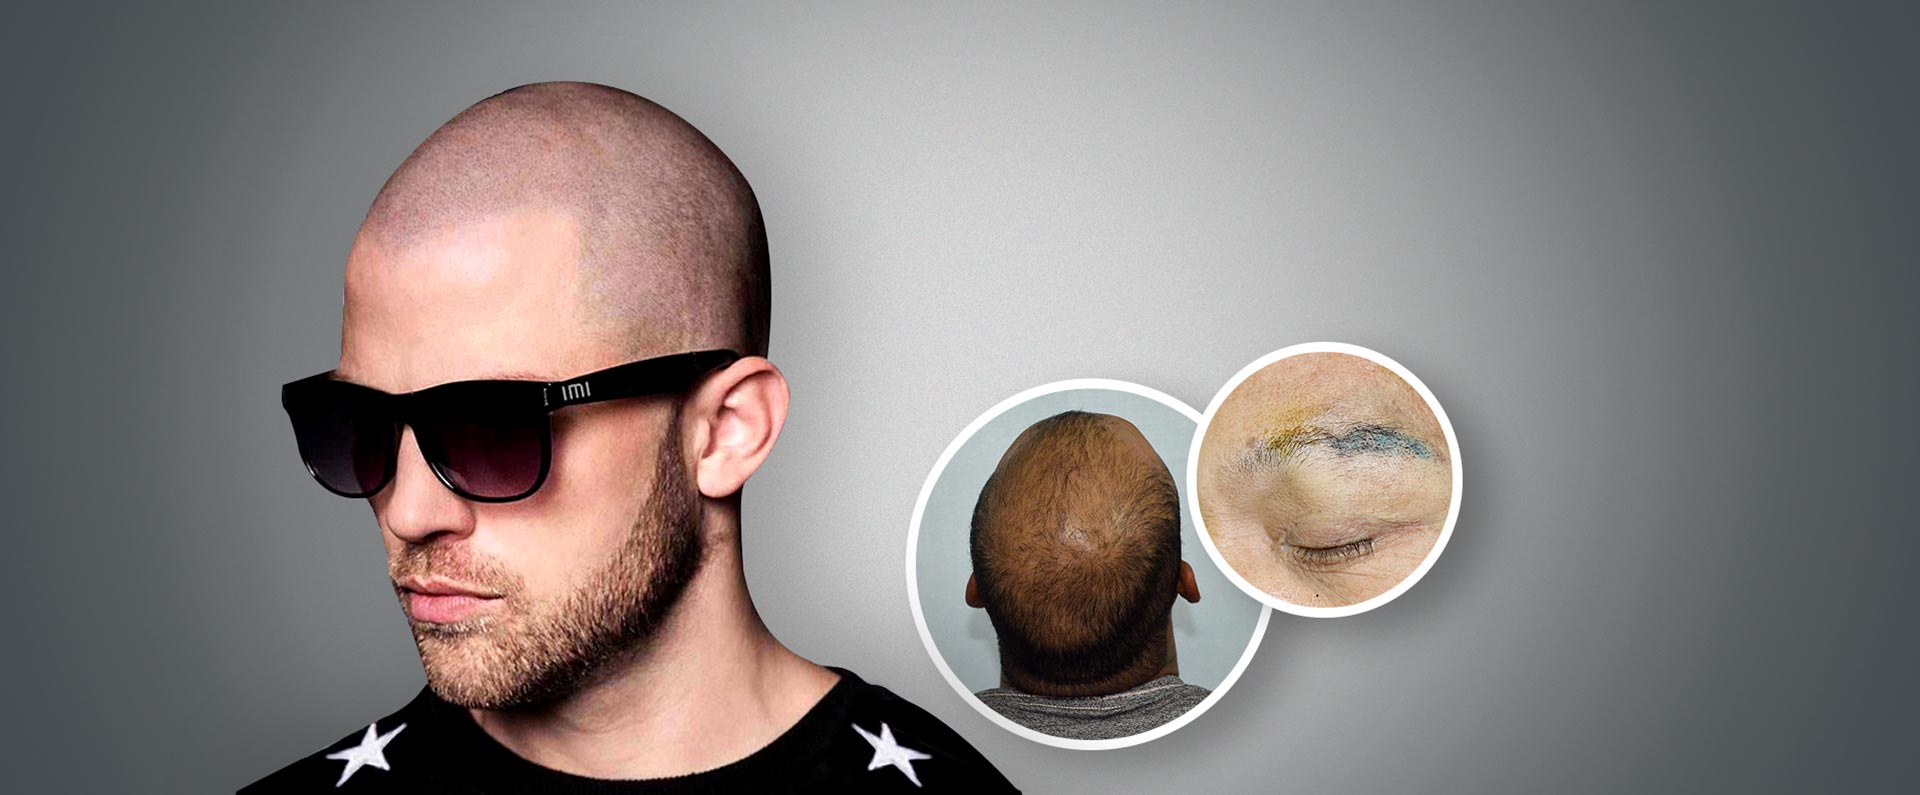 What You Need to Know Before Getting a Head Tattoo or SMP